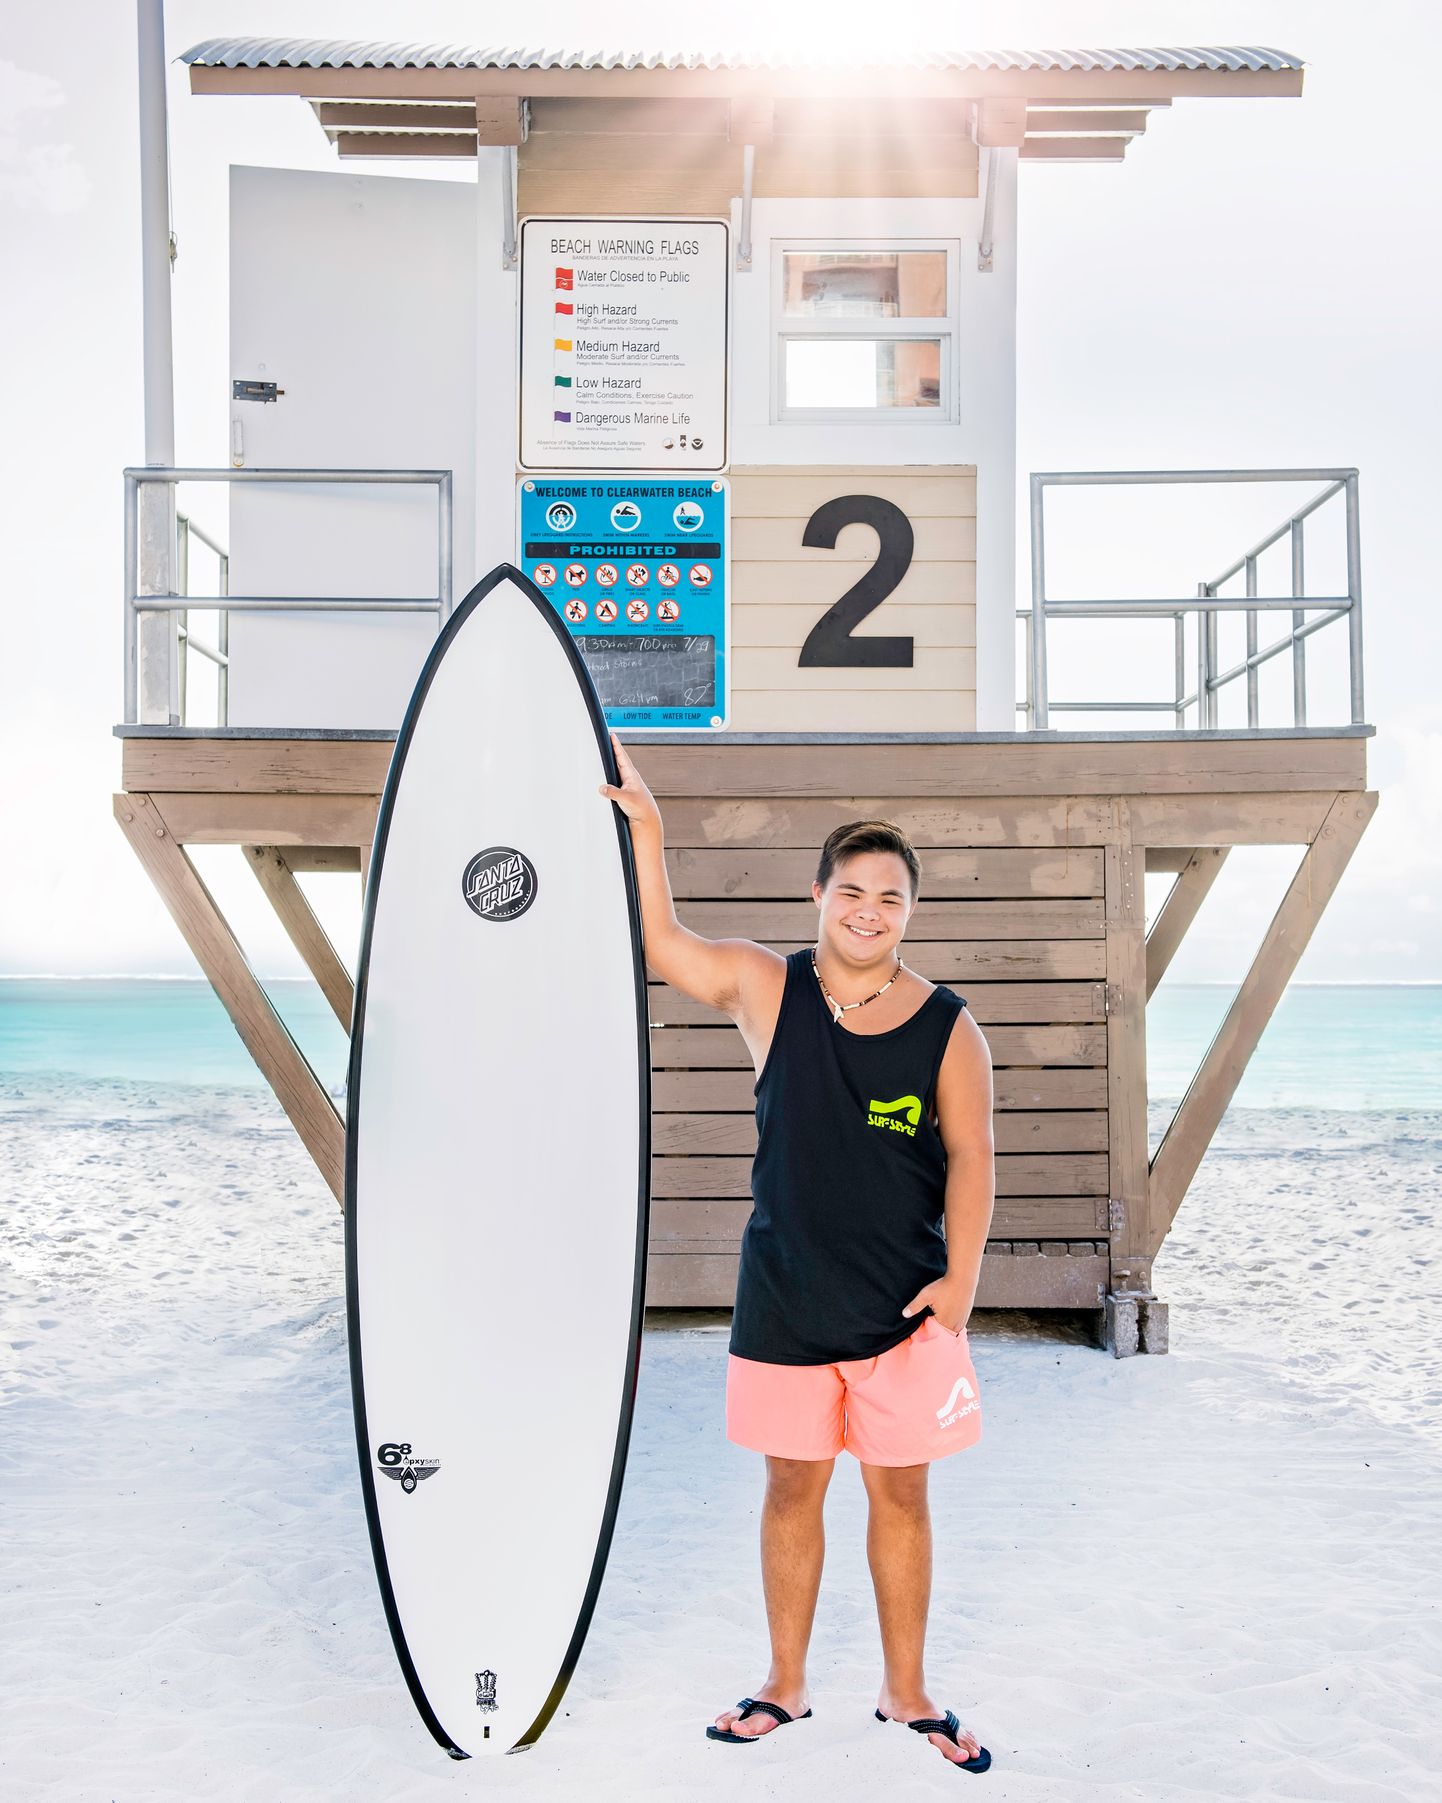 Model with down syndrome: Surf Style was thrilled to have him as model 